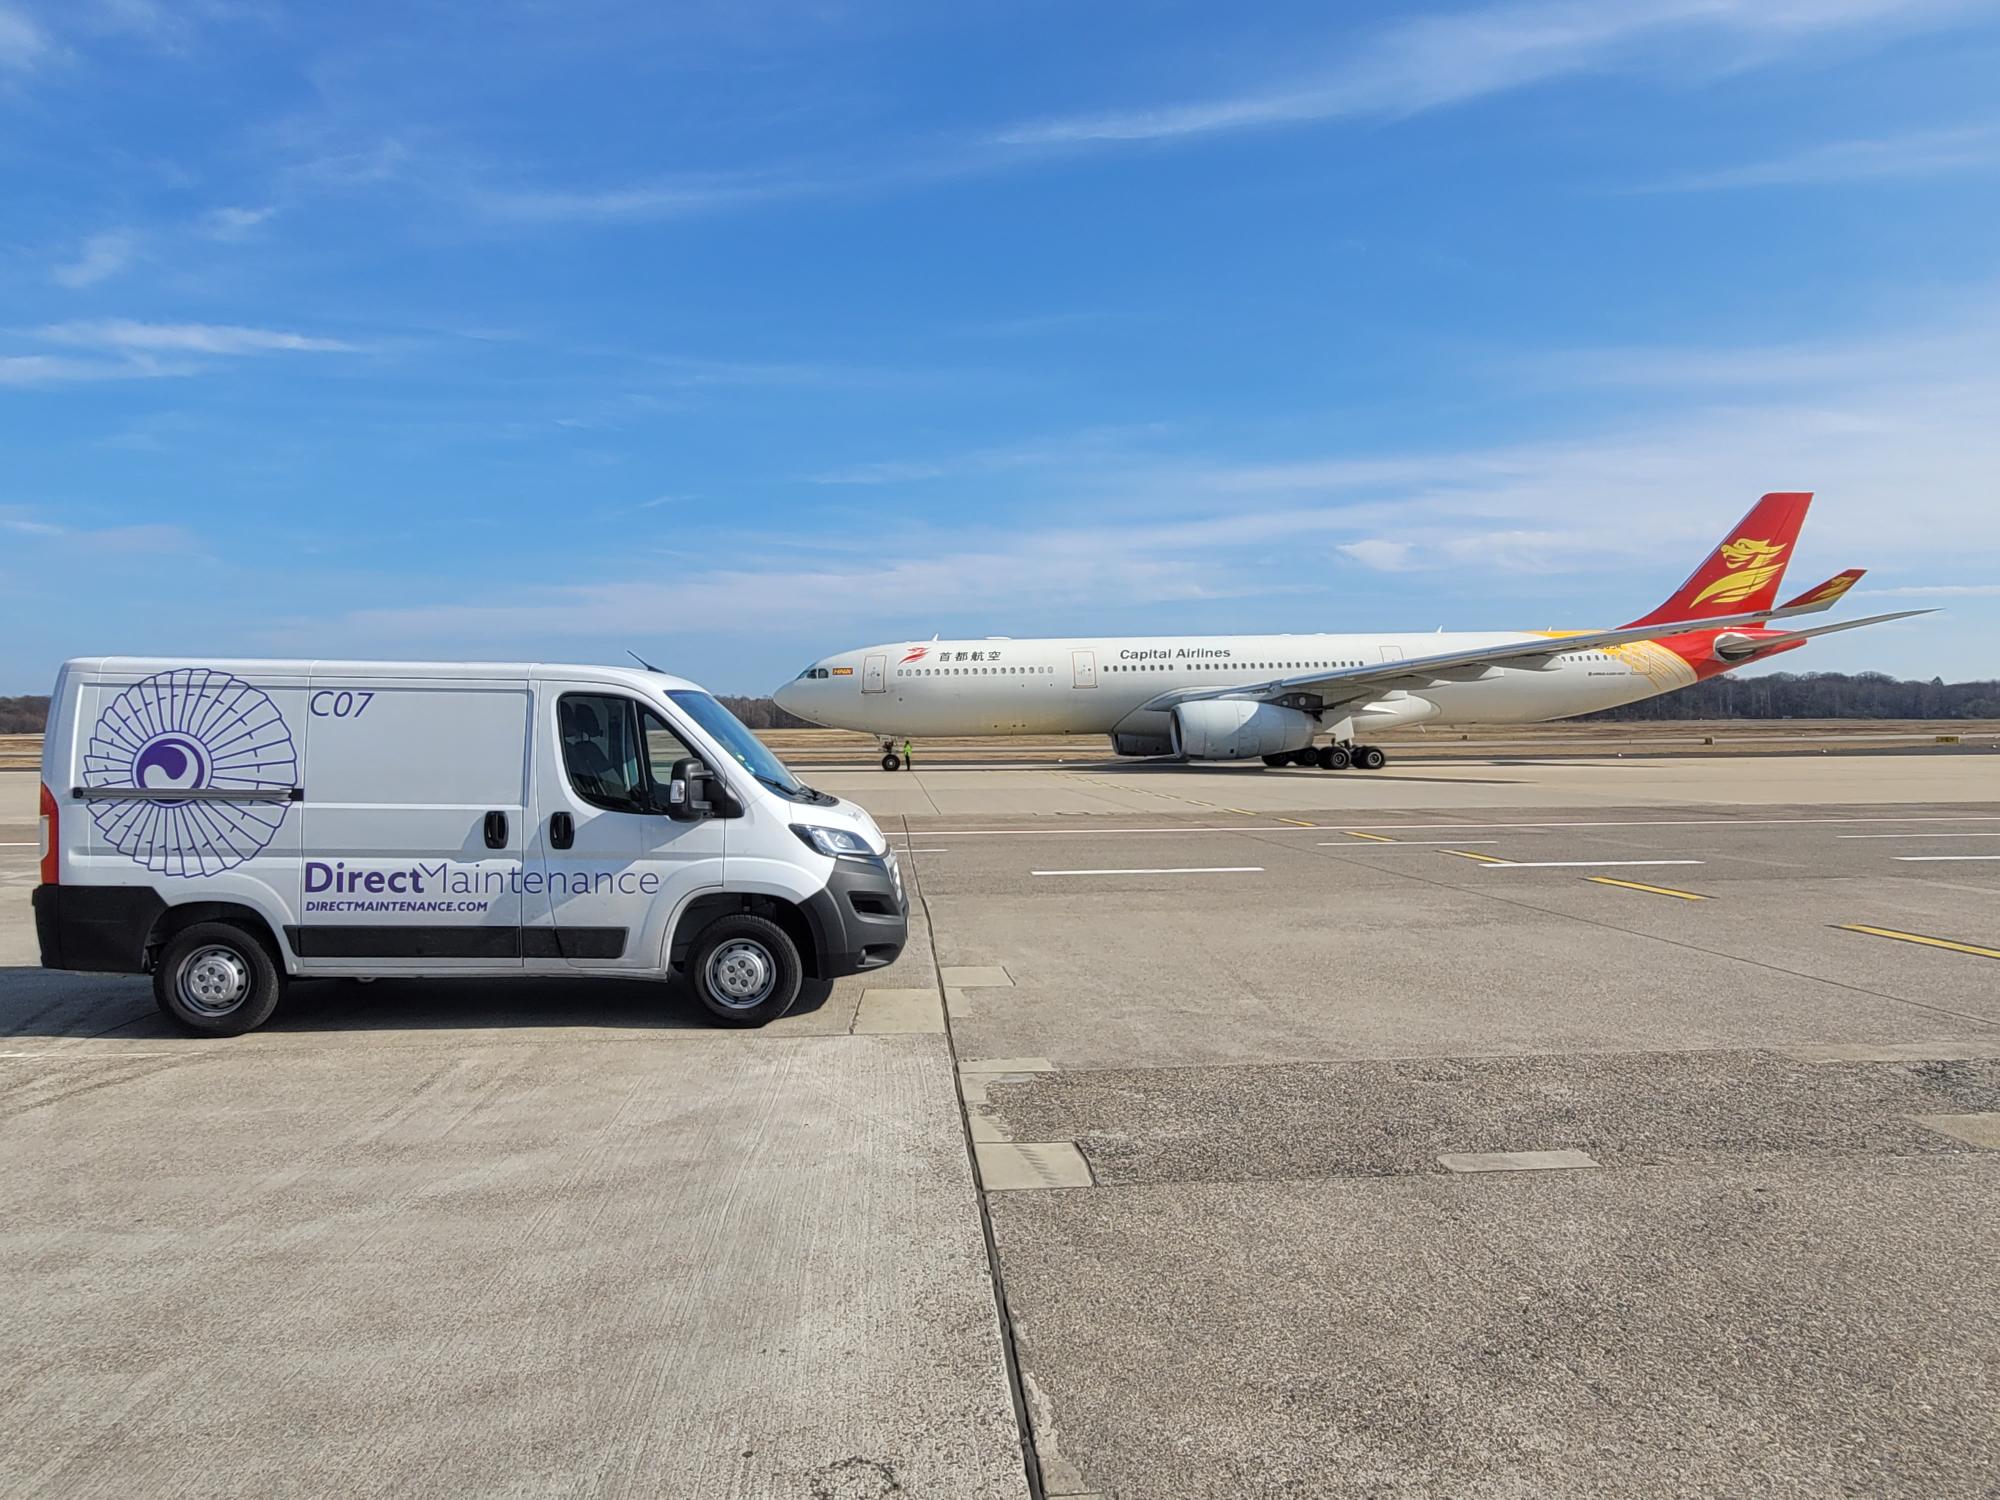 Direct Maintenance announced the recent agreement of full line maintenance support for Hainan Airlines in Germany